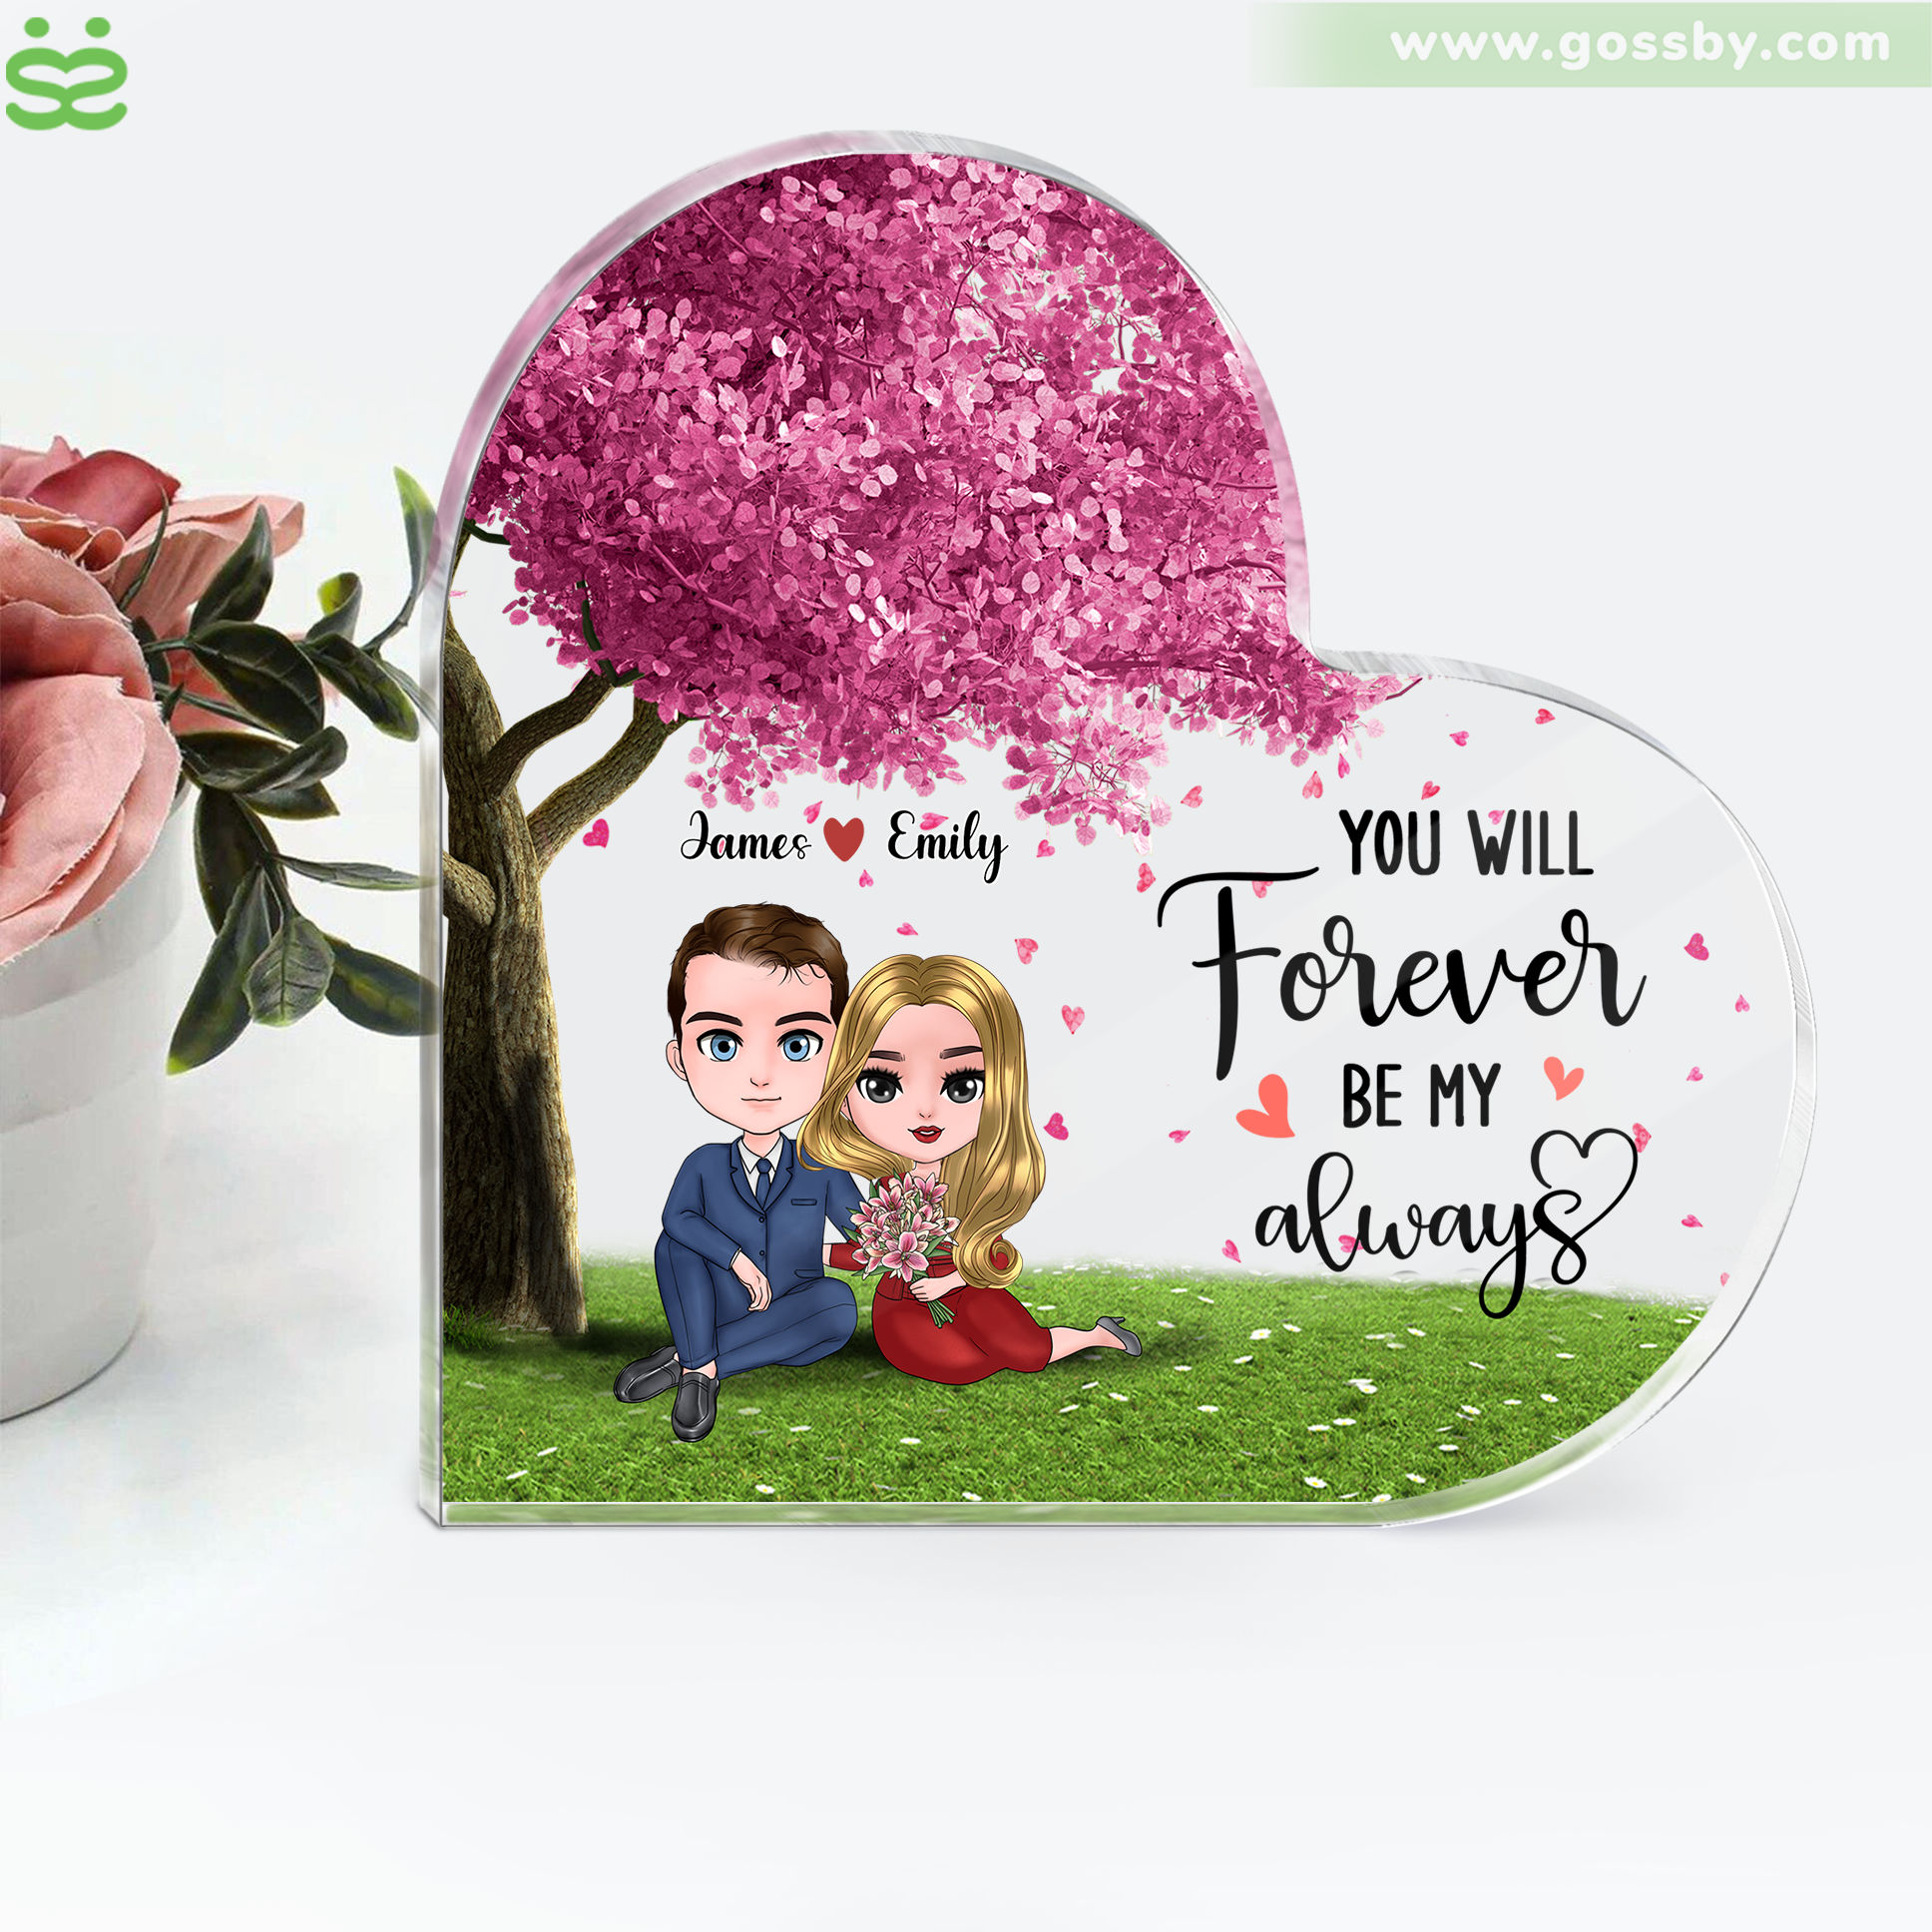 Transparent Plaque - Couple - You will Forever be my always (Custom Heart-Shaped Acrylic Plaque)_1